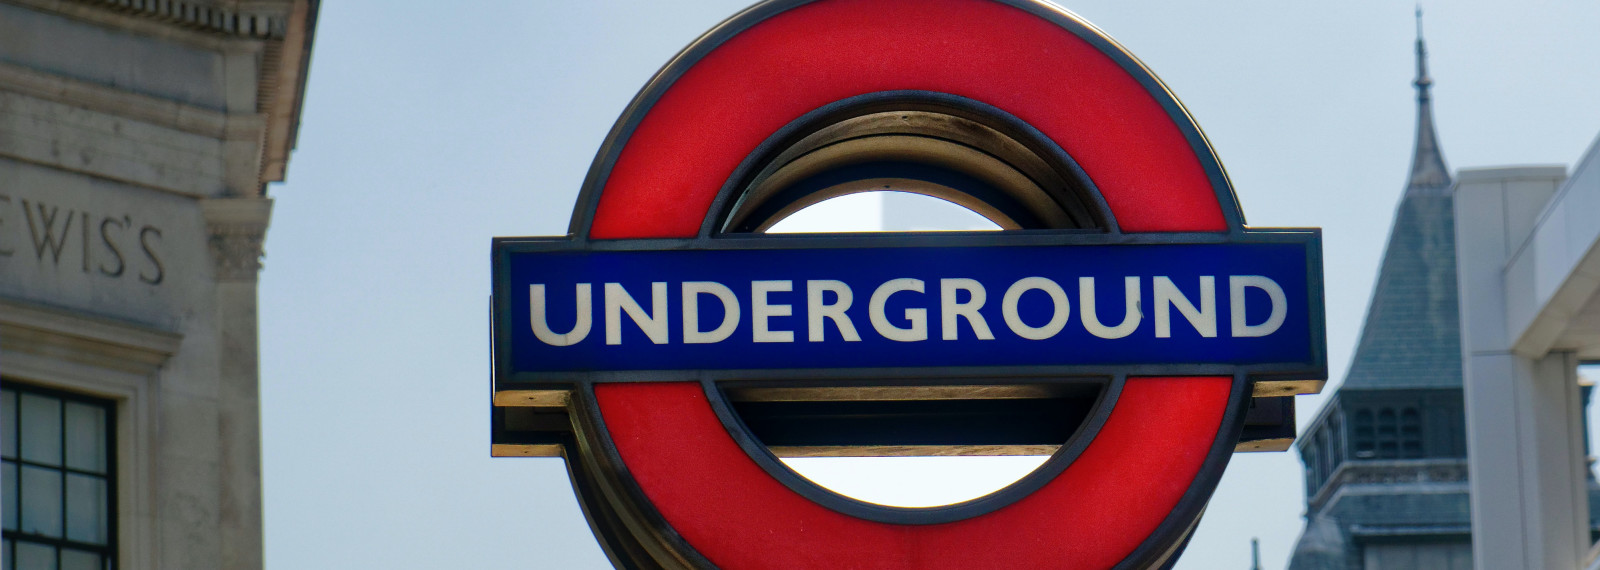 Image of a London Underground sign